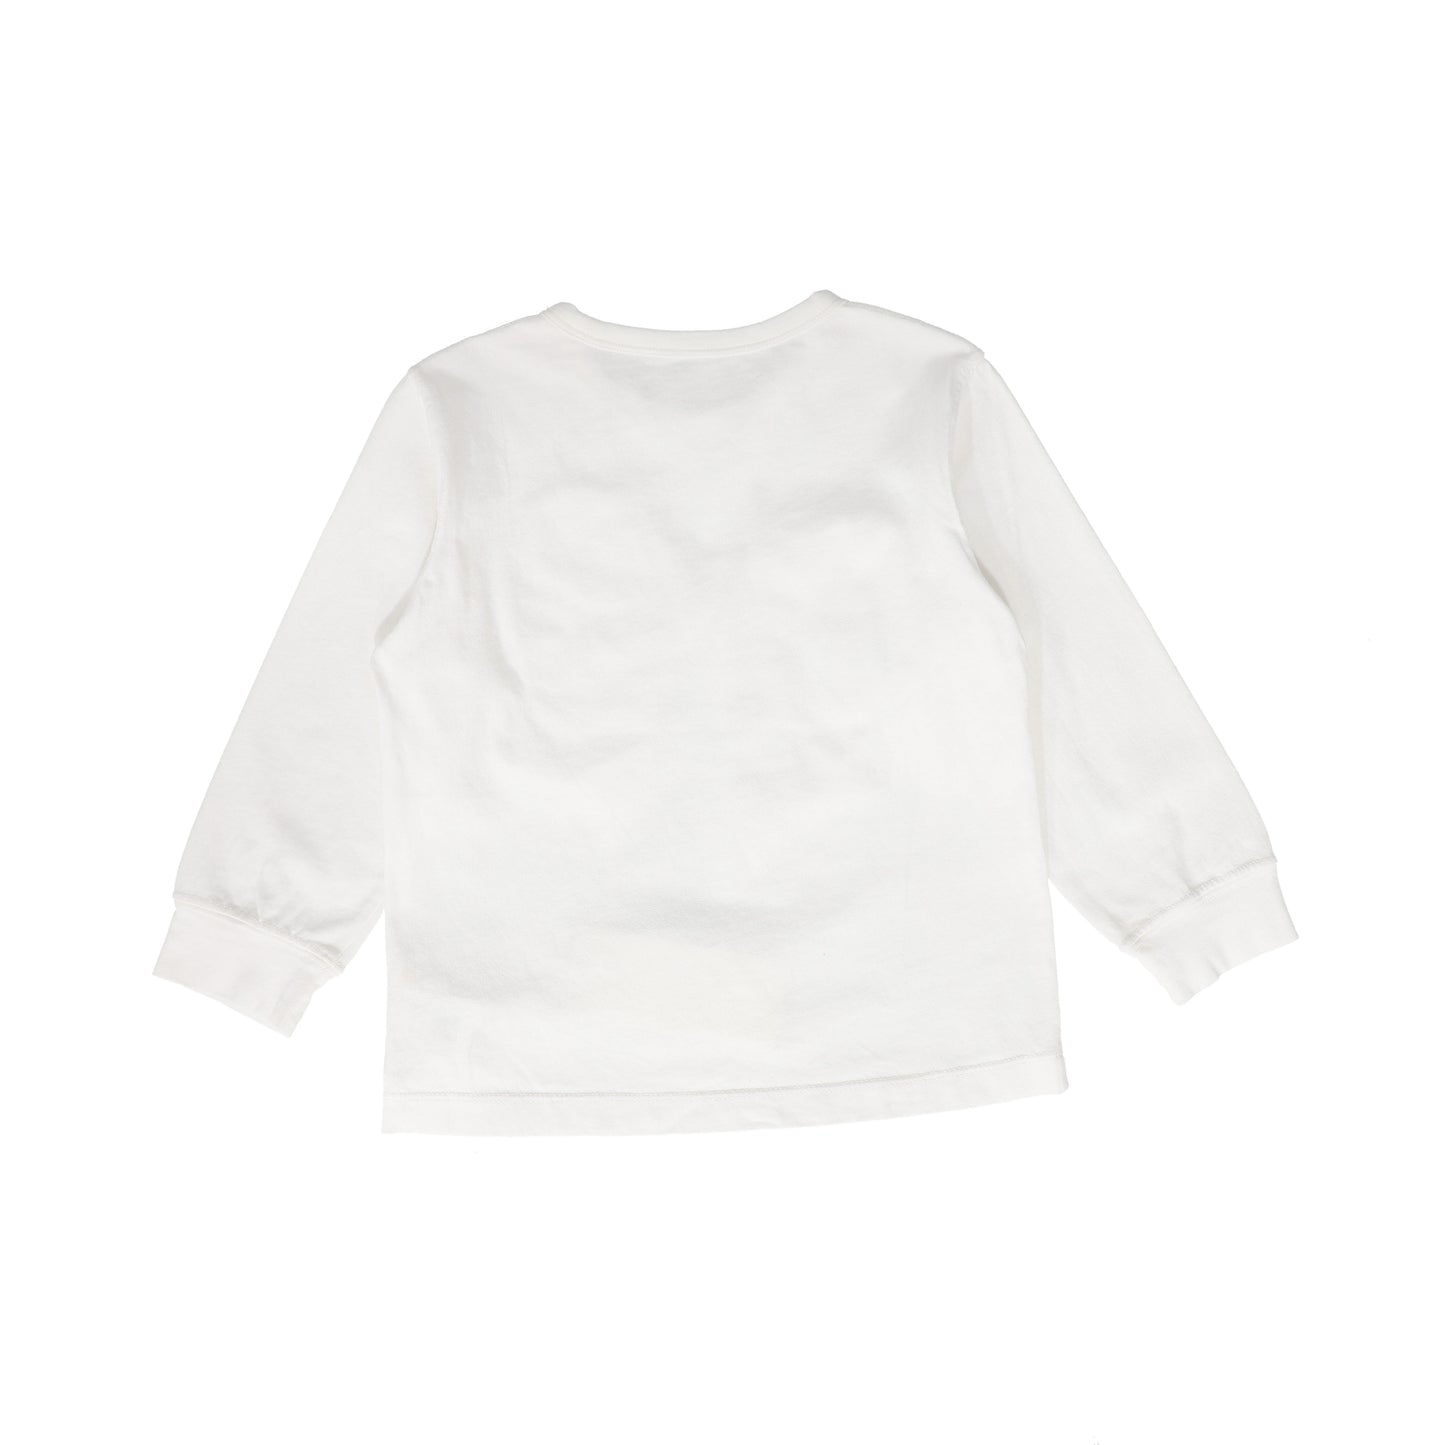 JNBY WHITE BOW T-SHIRT